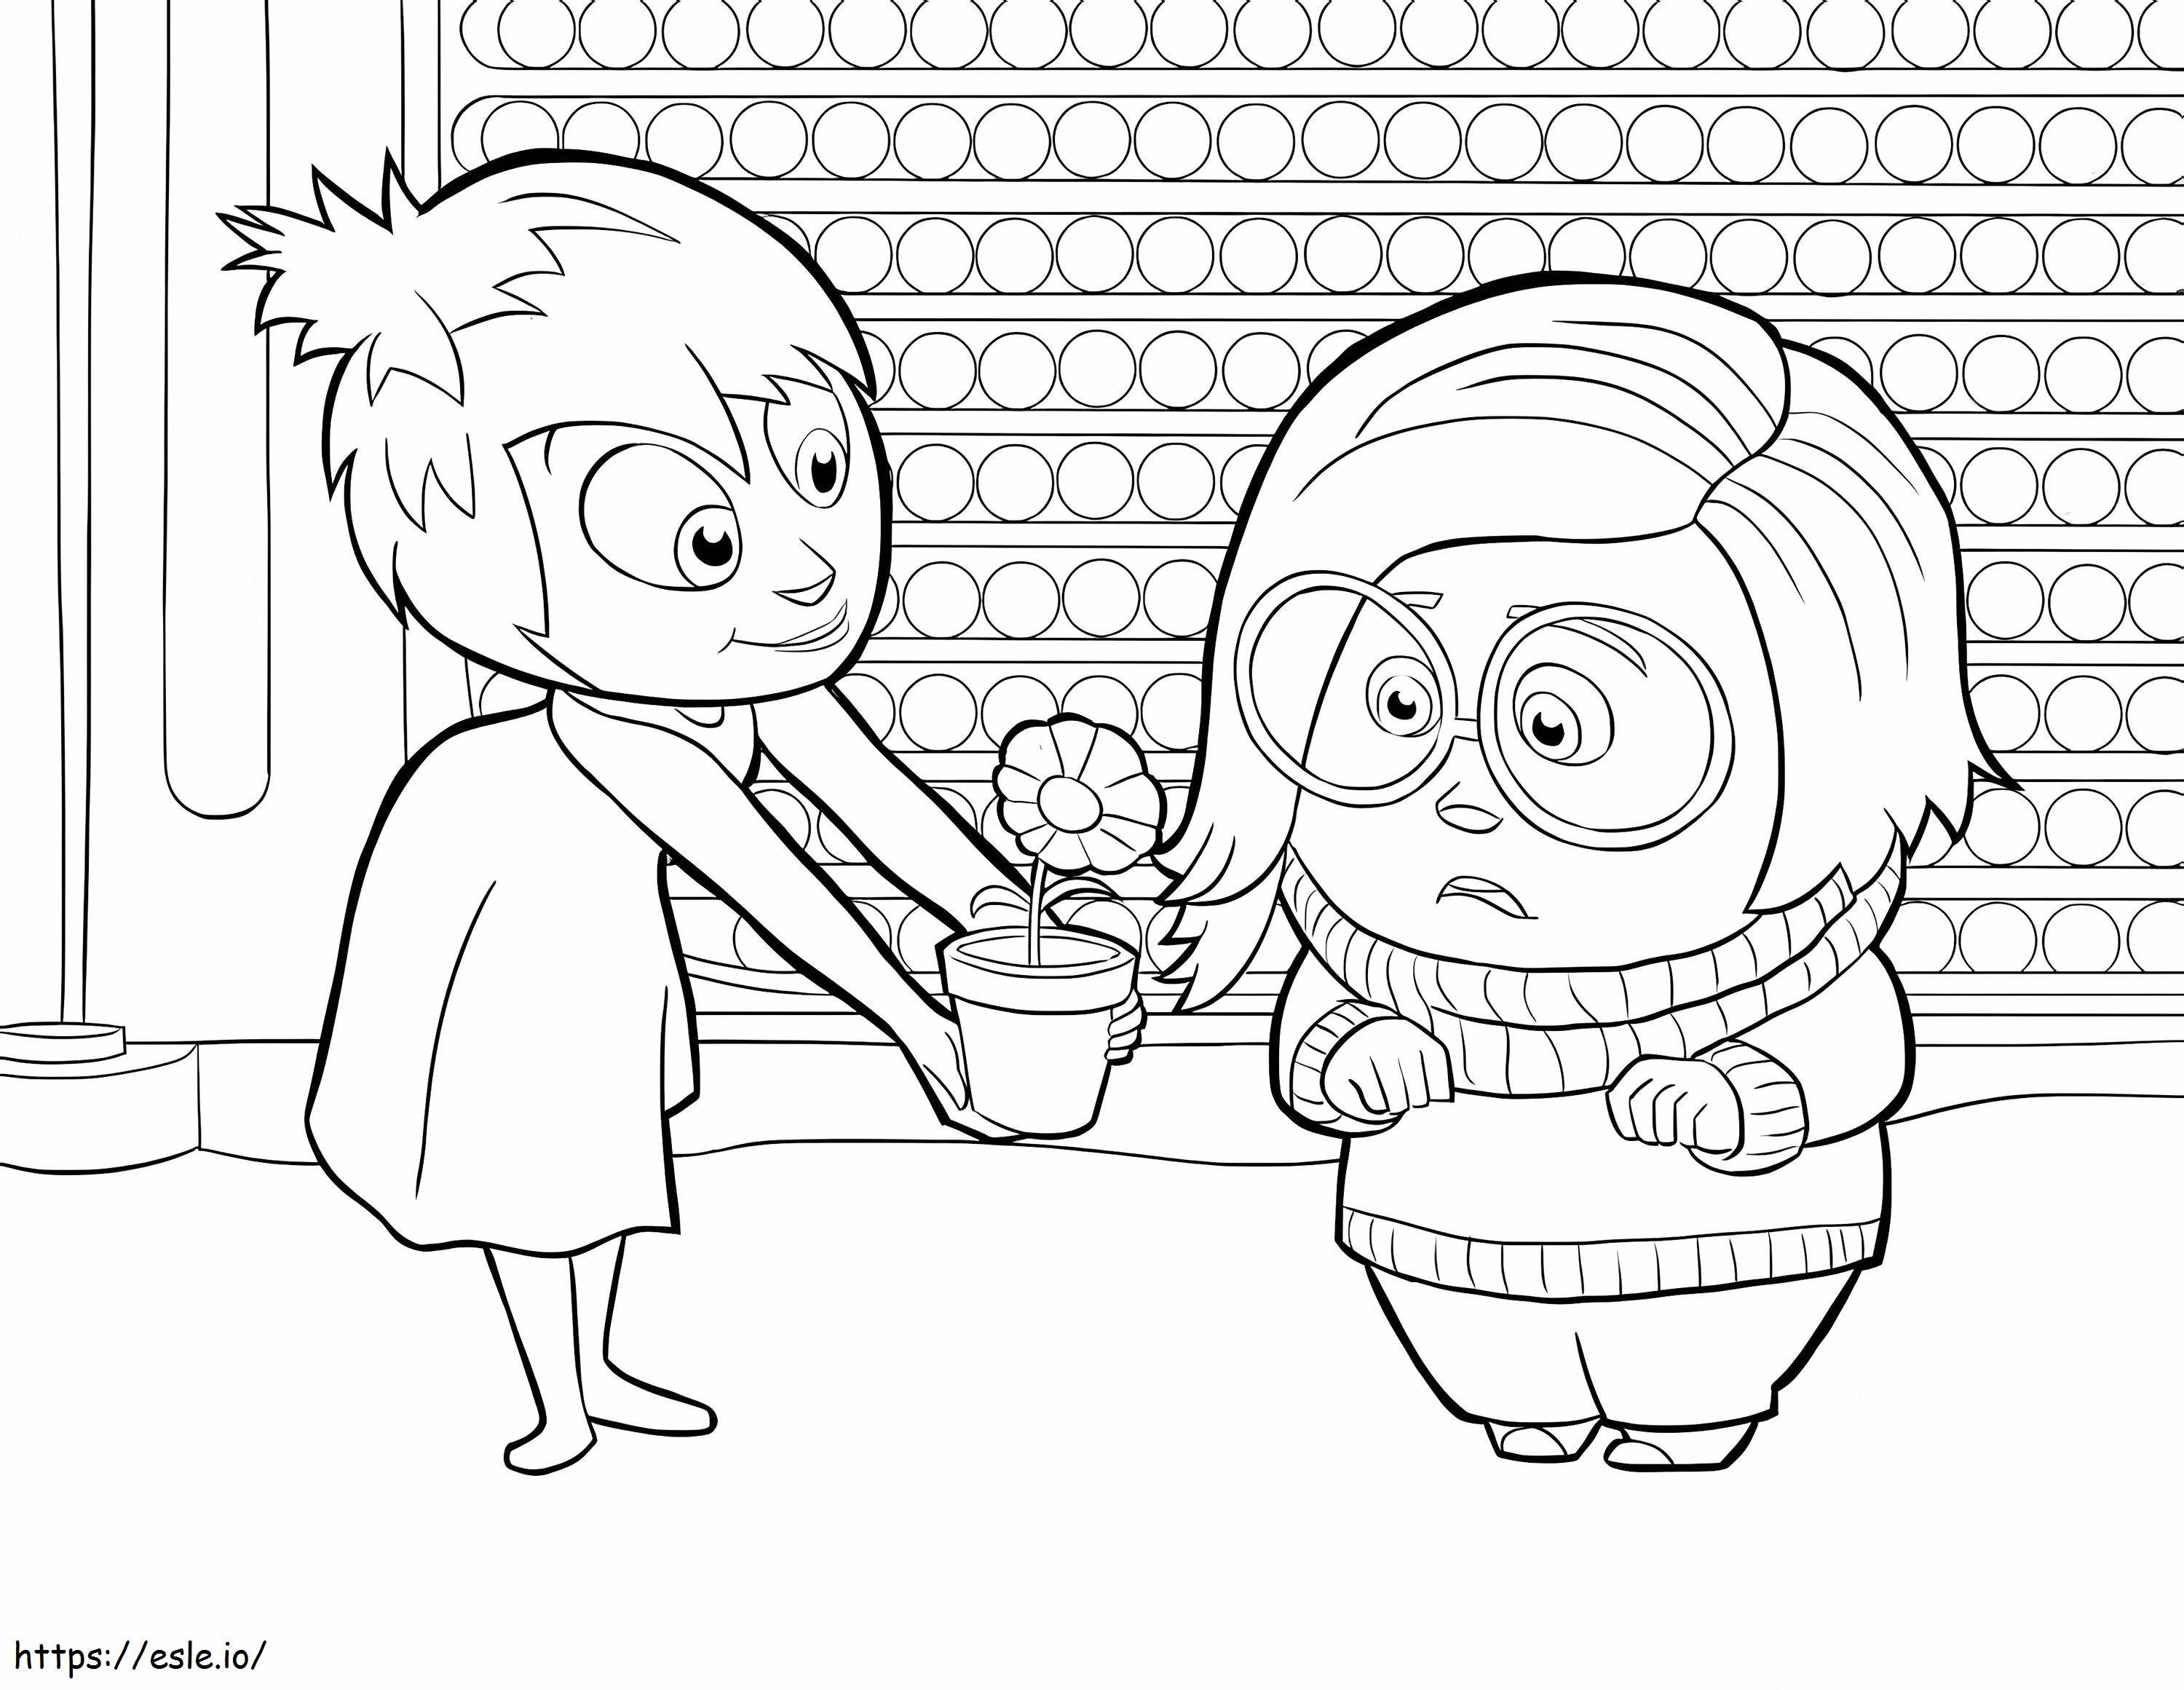 Sadness With Joy coloring page